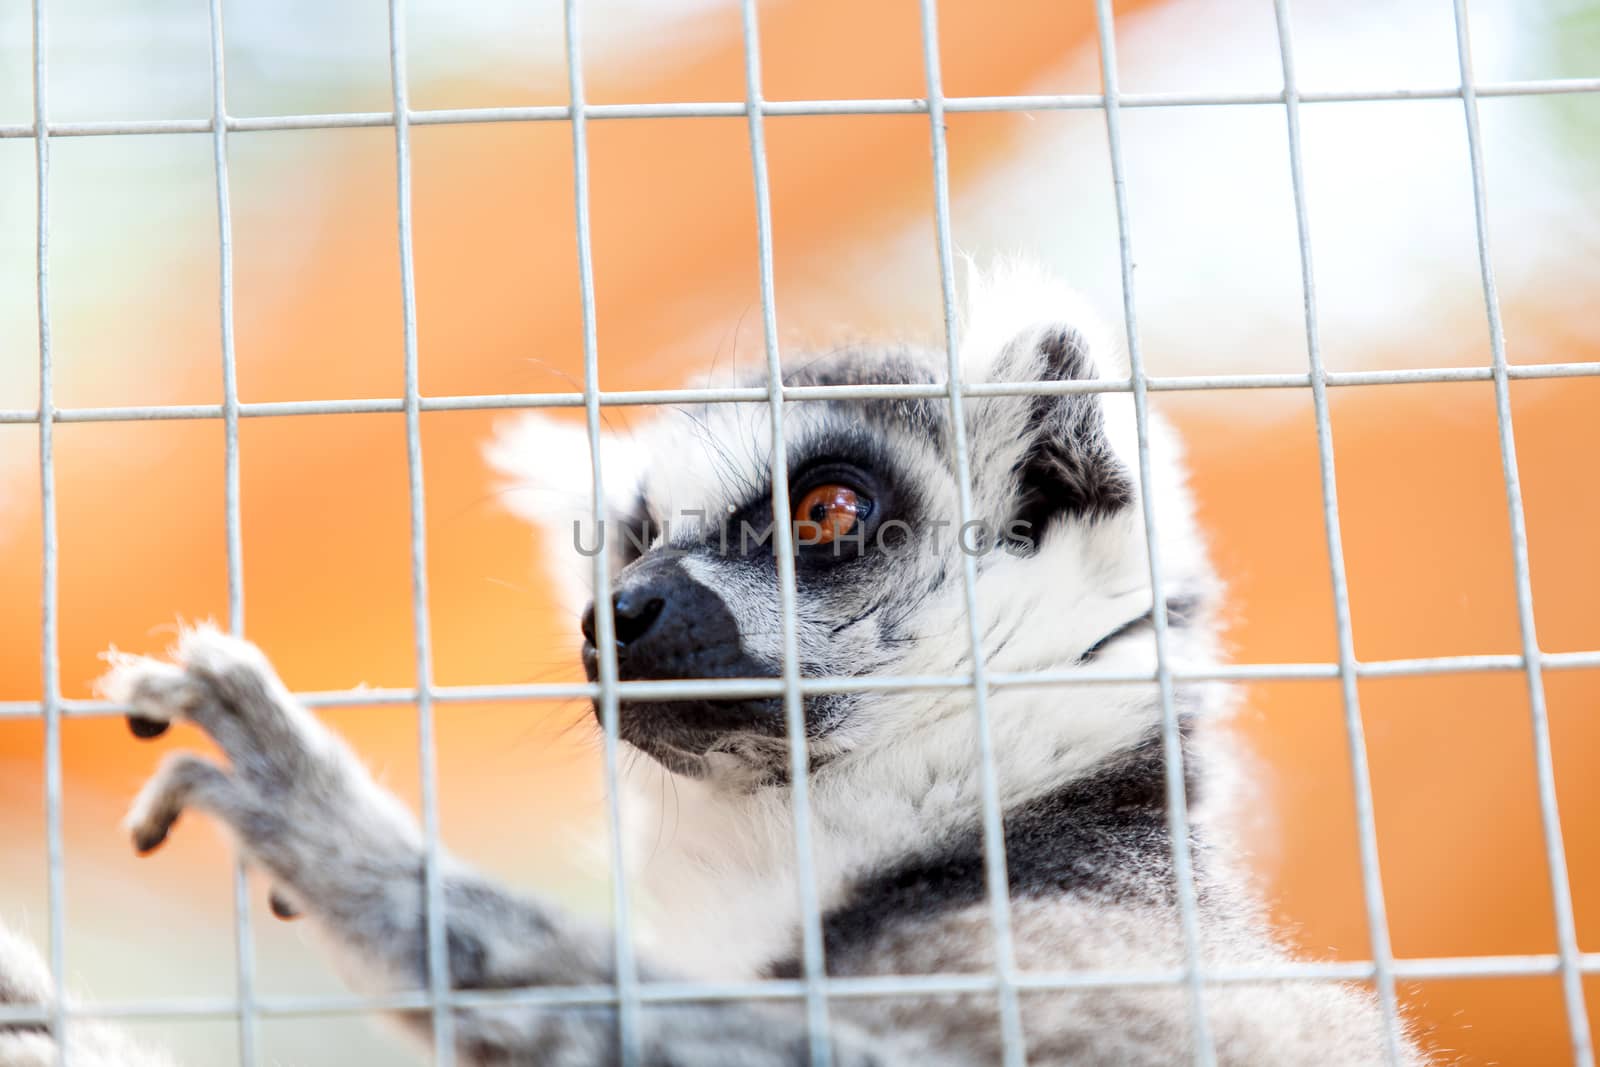 Portrait of a lemur behind bars, locked up by MegaArt